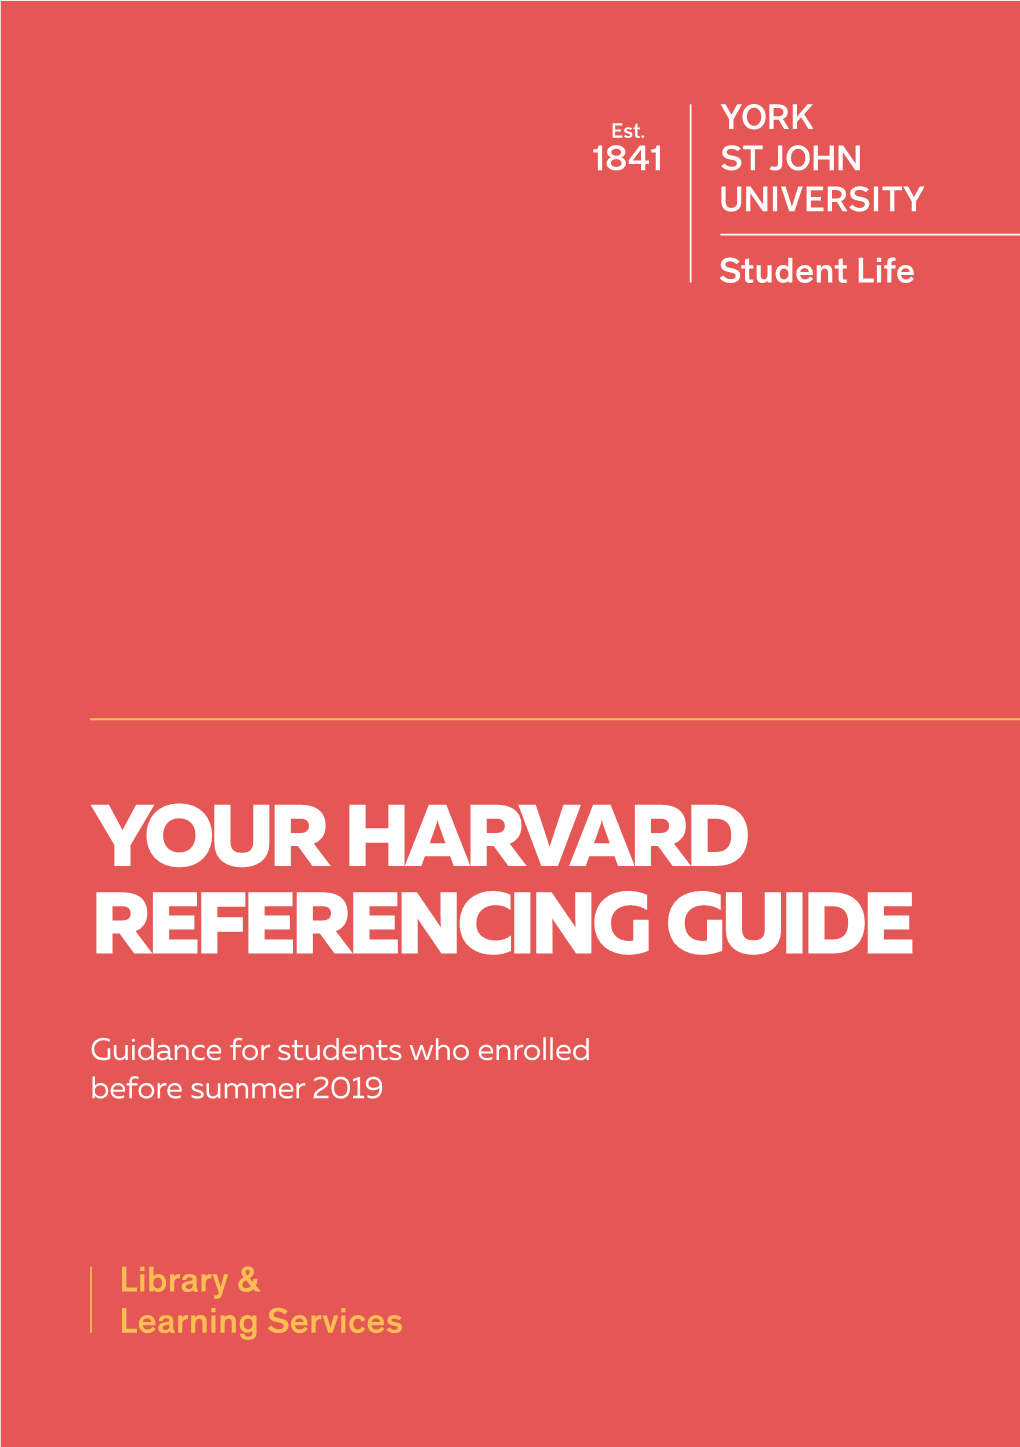 Your Harvard Referencing Guide